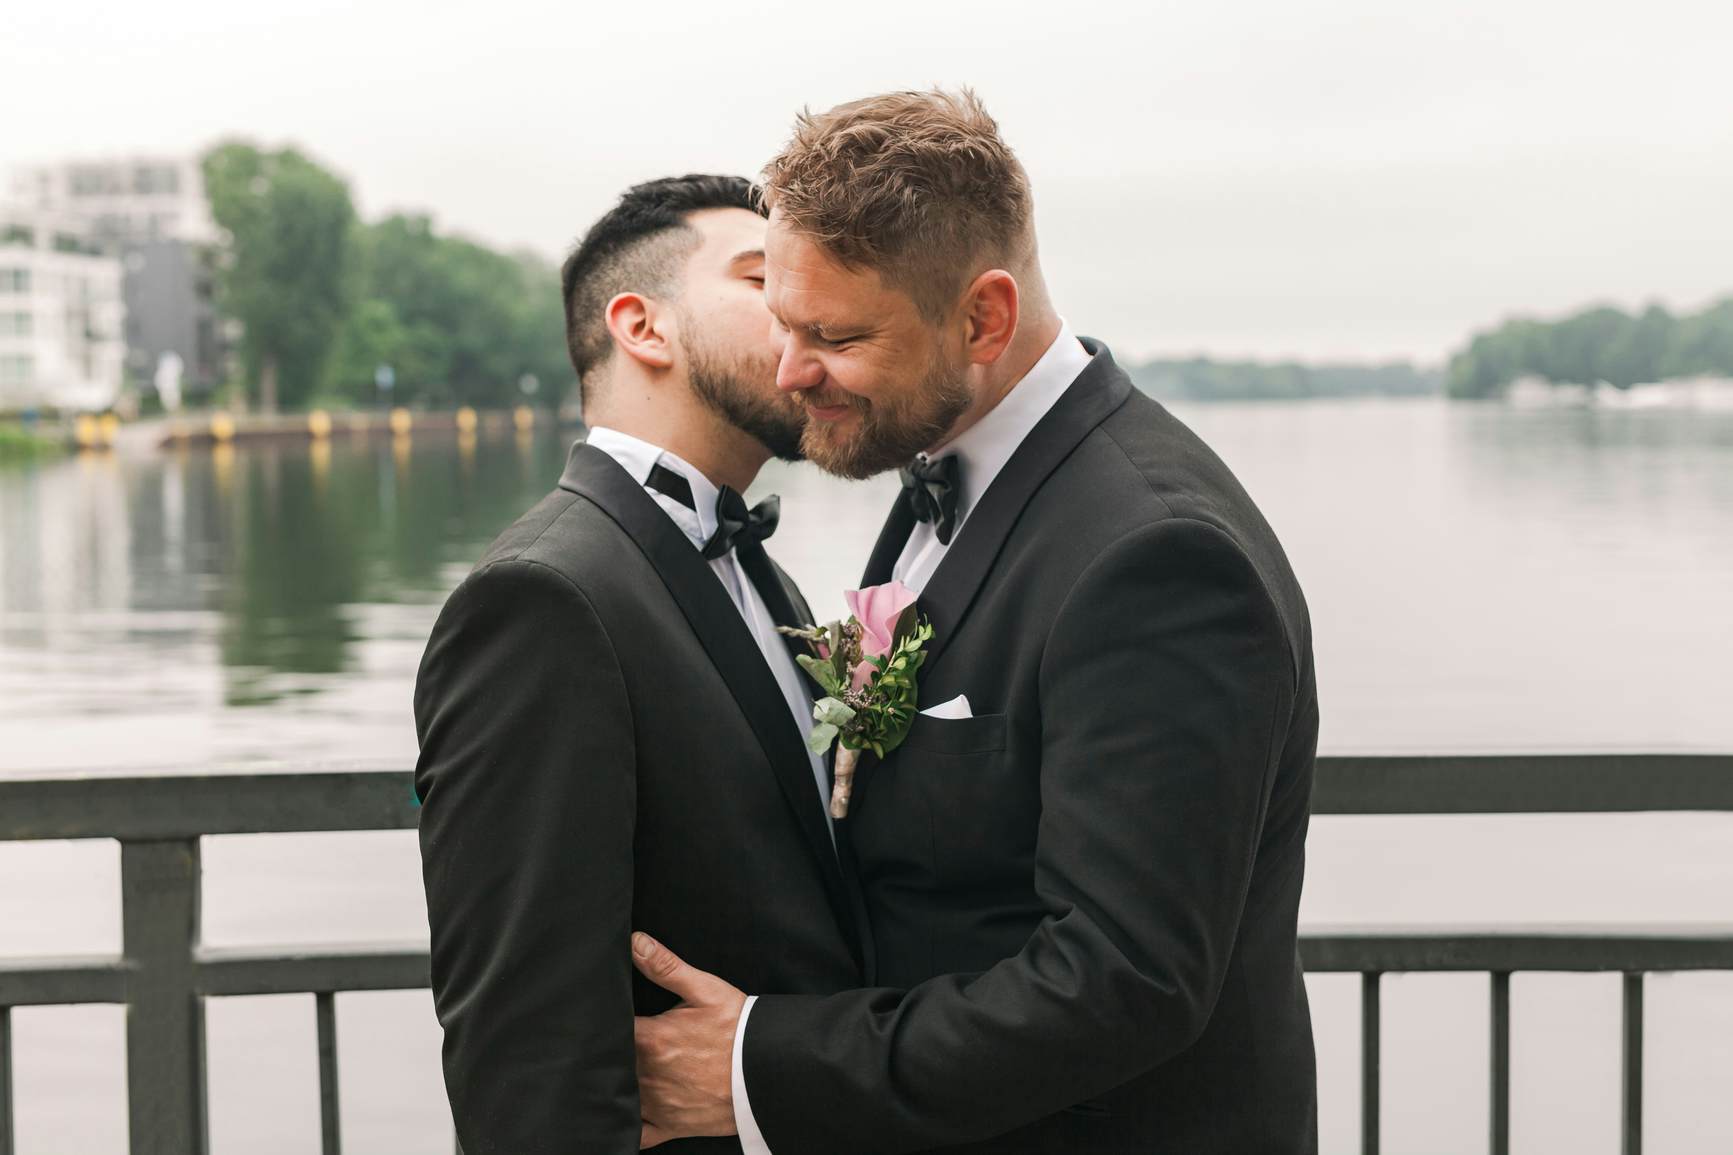 Planning a same sex marriage in Switzerland - all you need to know picture